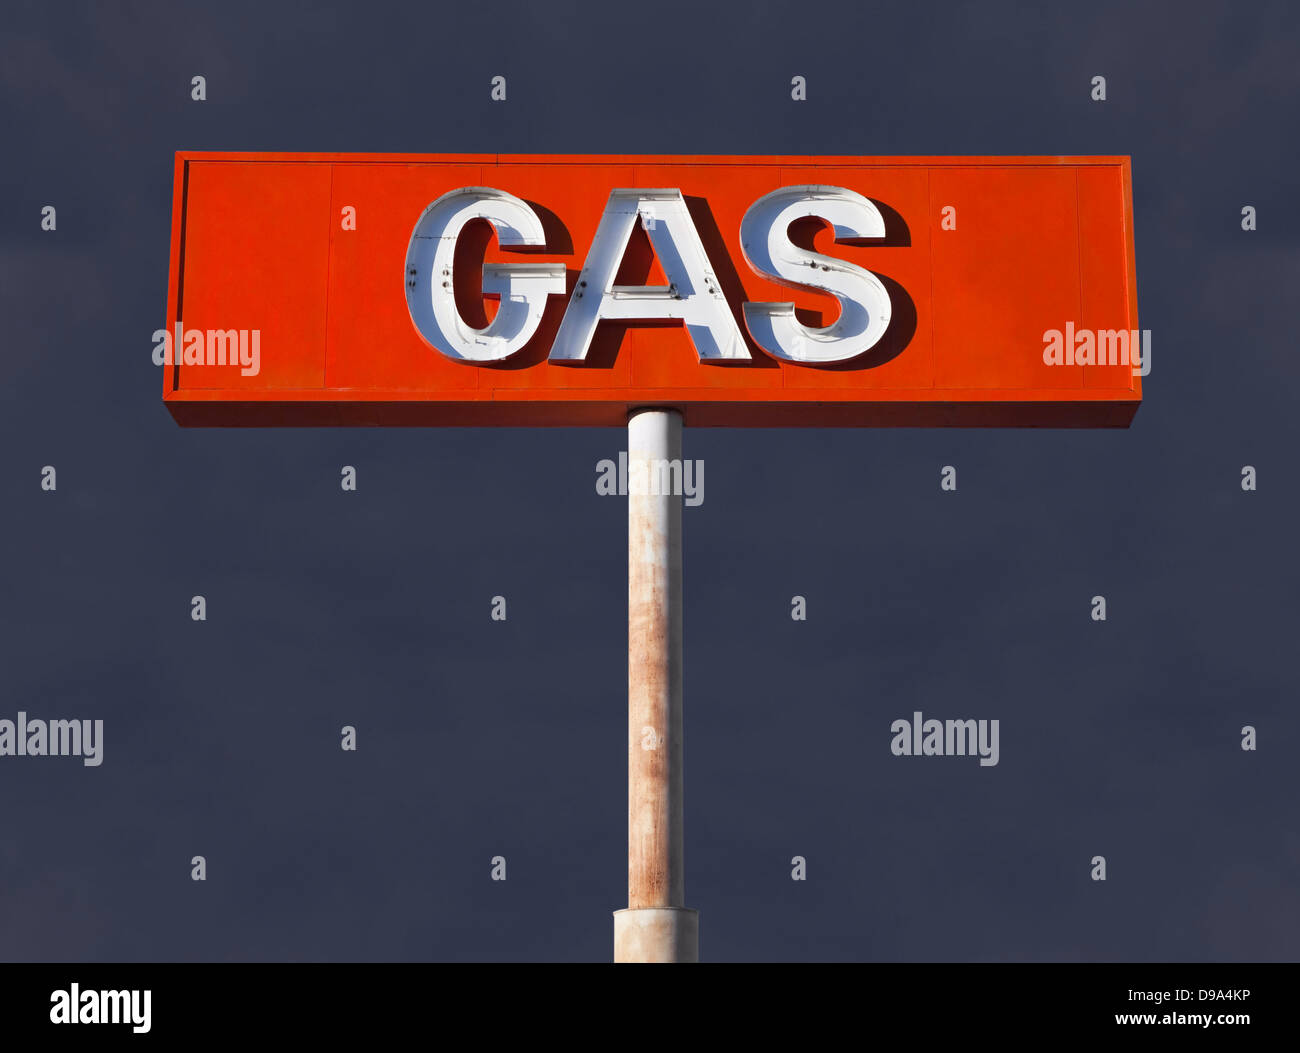 Vintage neon gas sign with storm sky. Stock Photo